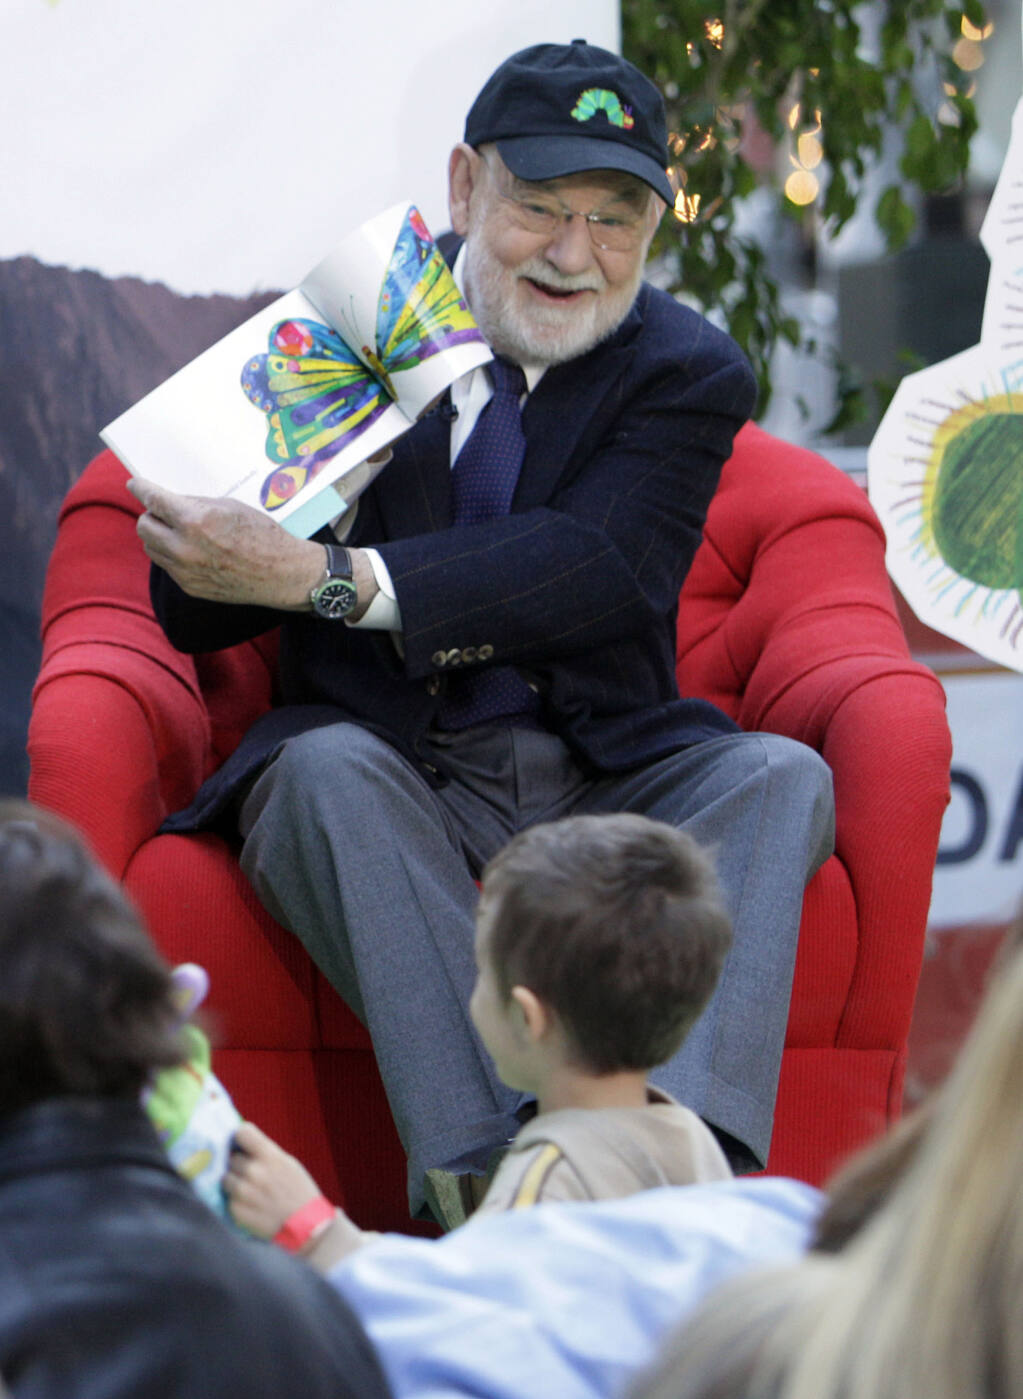 Eric Carle Dead: 'The Very Hungry Caterpillar' Author Was 91